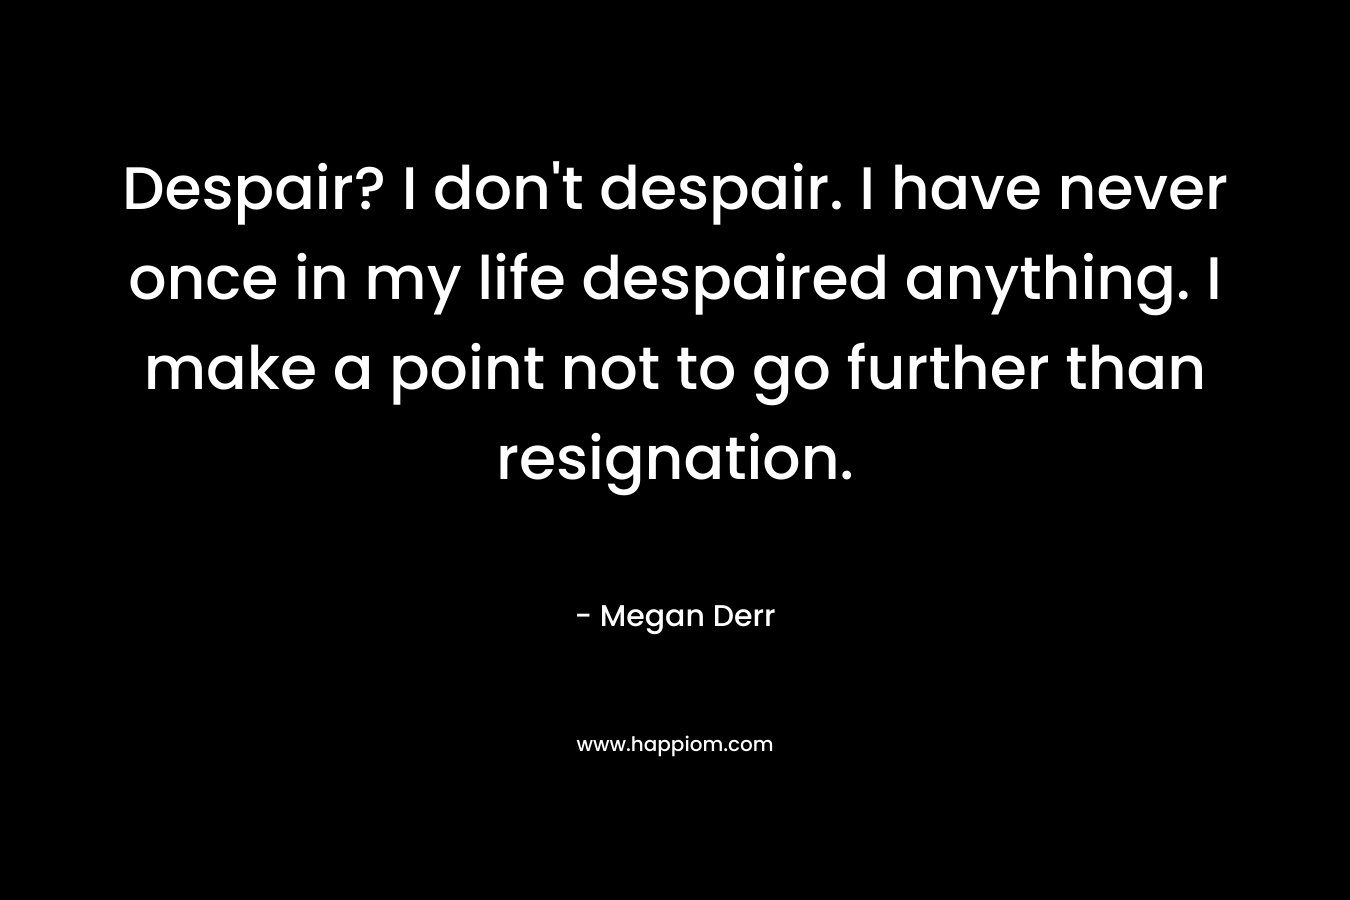 Despair? I don’t despair. I have never once in my life despaired anything. I make a point not to go further than resignation. – Megan Derr